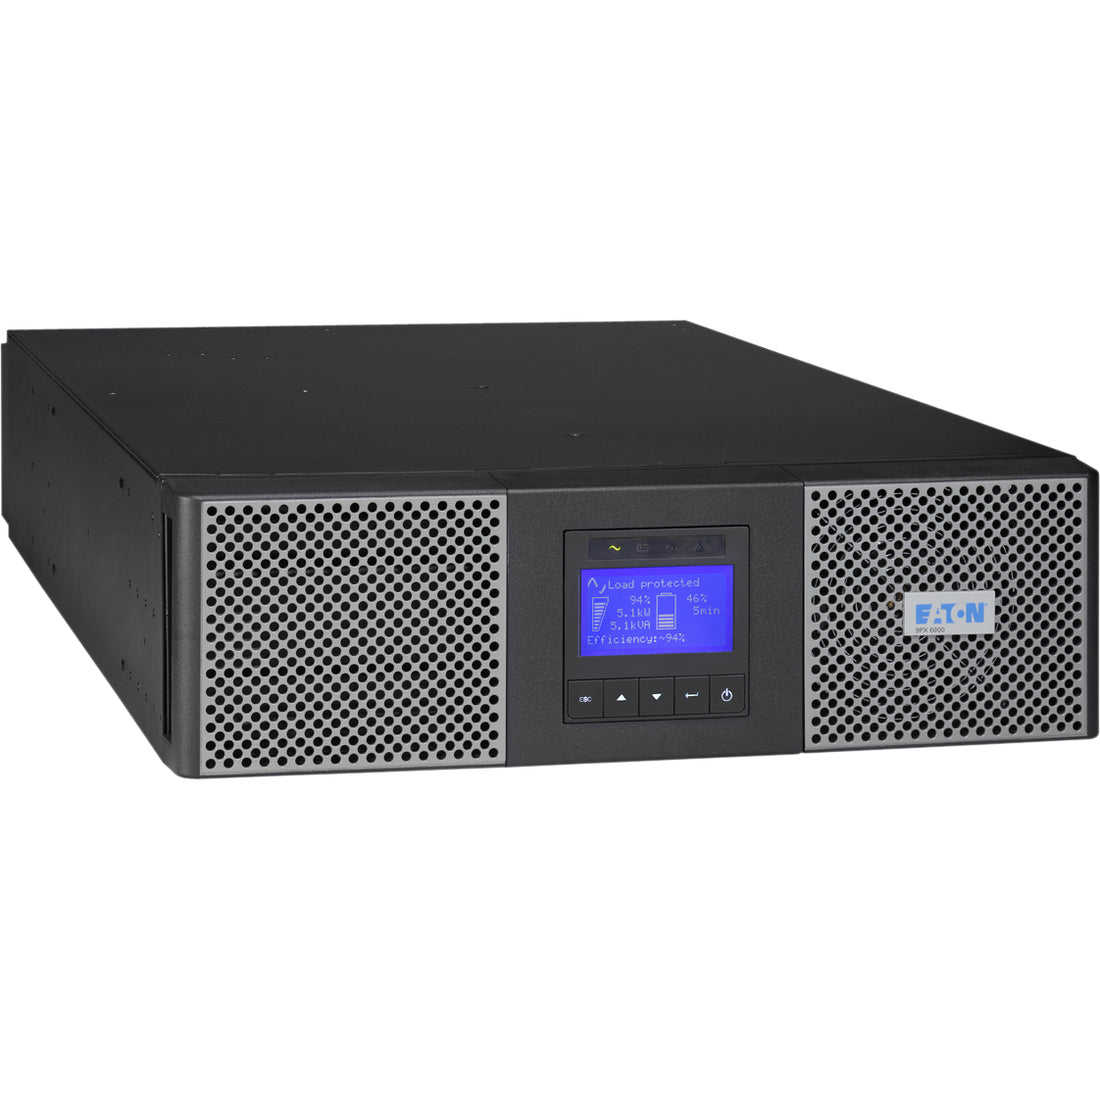 Eaton 9PX 8000VA 7200W 208V Online Double-Conversion UPS - Hardwired Input, 18x 5-20R, 2 L6-30R Outlets, Cybersecure Network Card, Extended Run, 9U Rack/Tower - Battery Backup - 9PX8KTF5